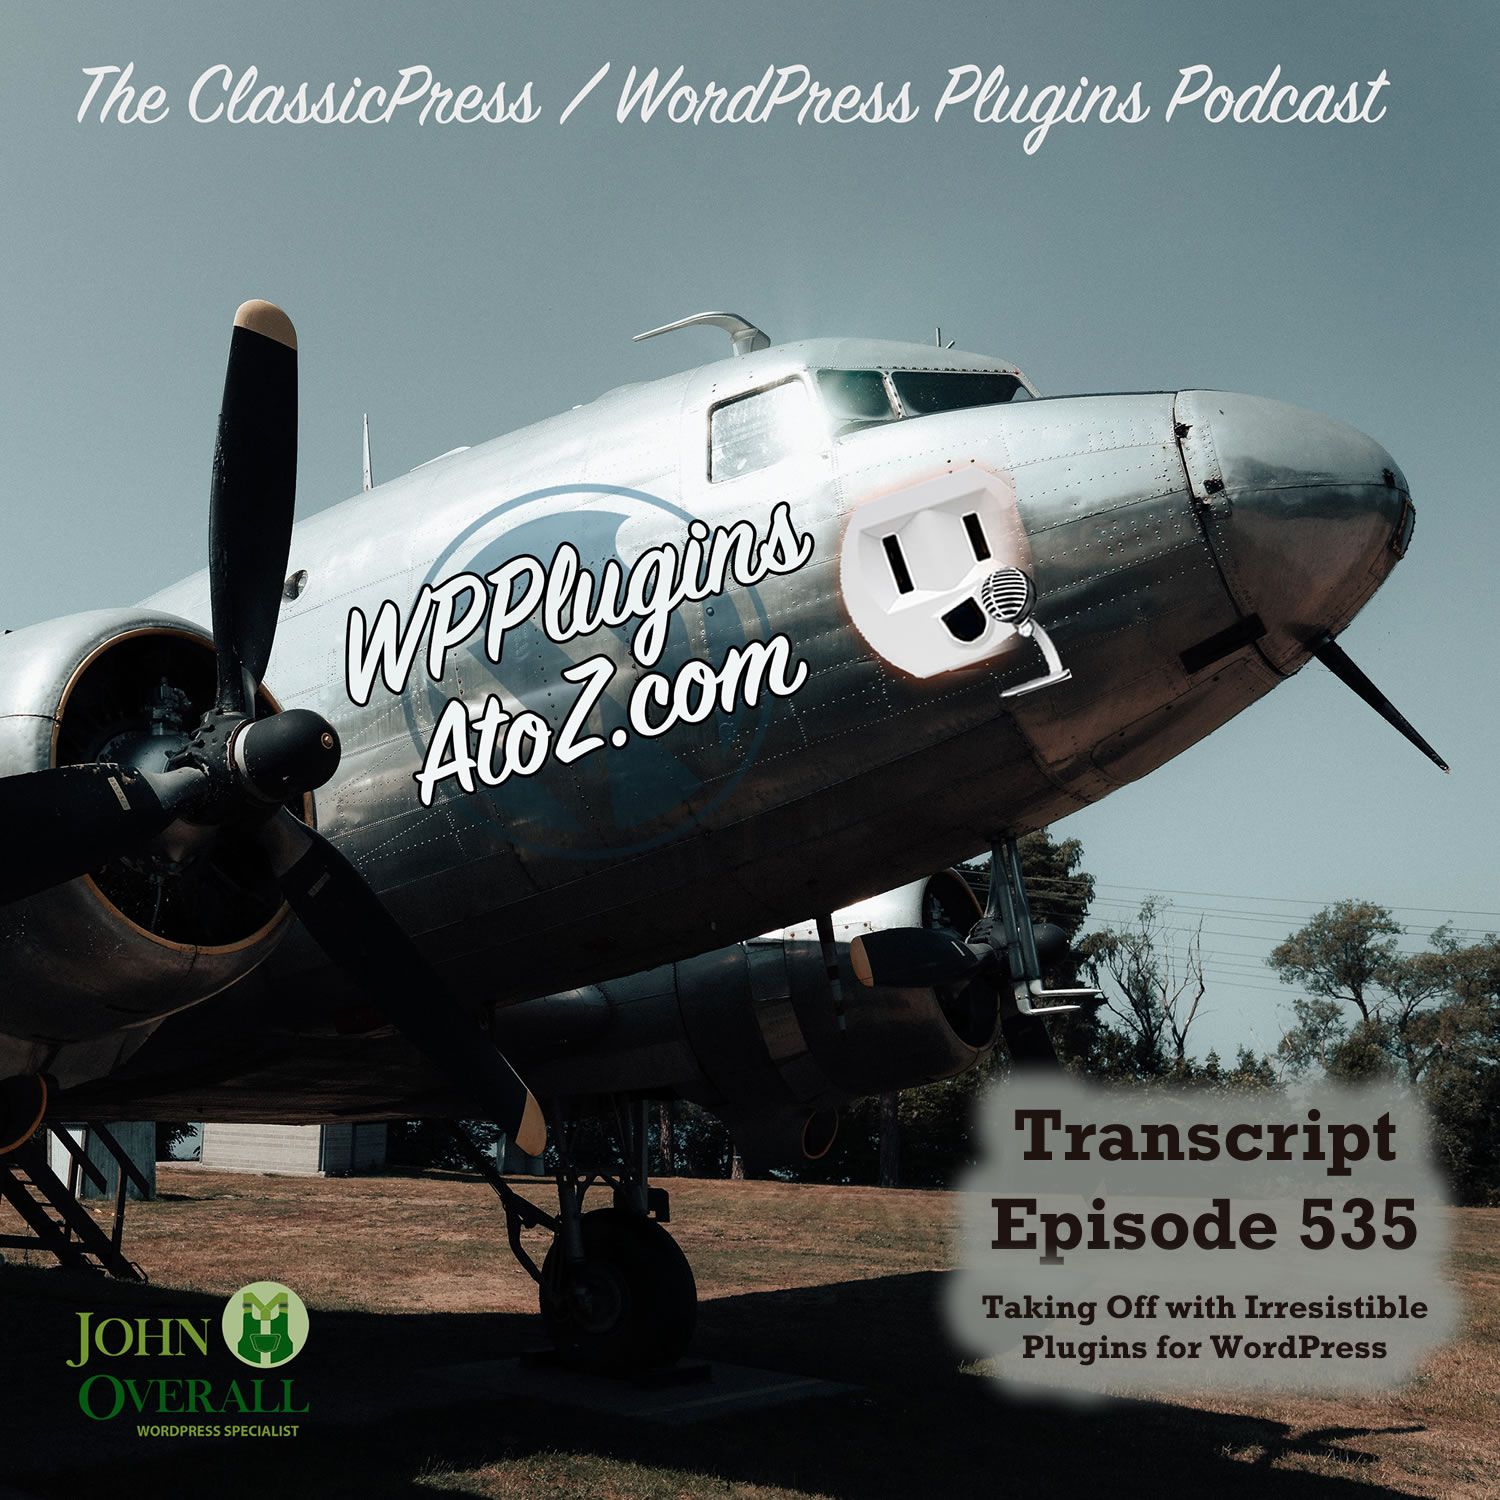 Transcript for Episode 535 – Product Up-Sells, Warranties, User Logouts… and ClassicPress Options. It’s all coming up on WordPress Plugins A-Z!